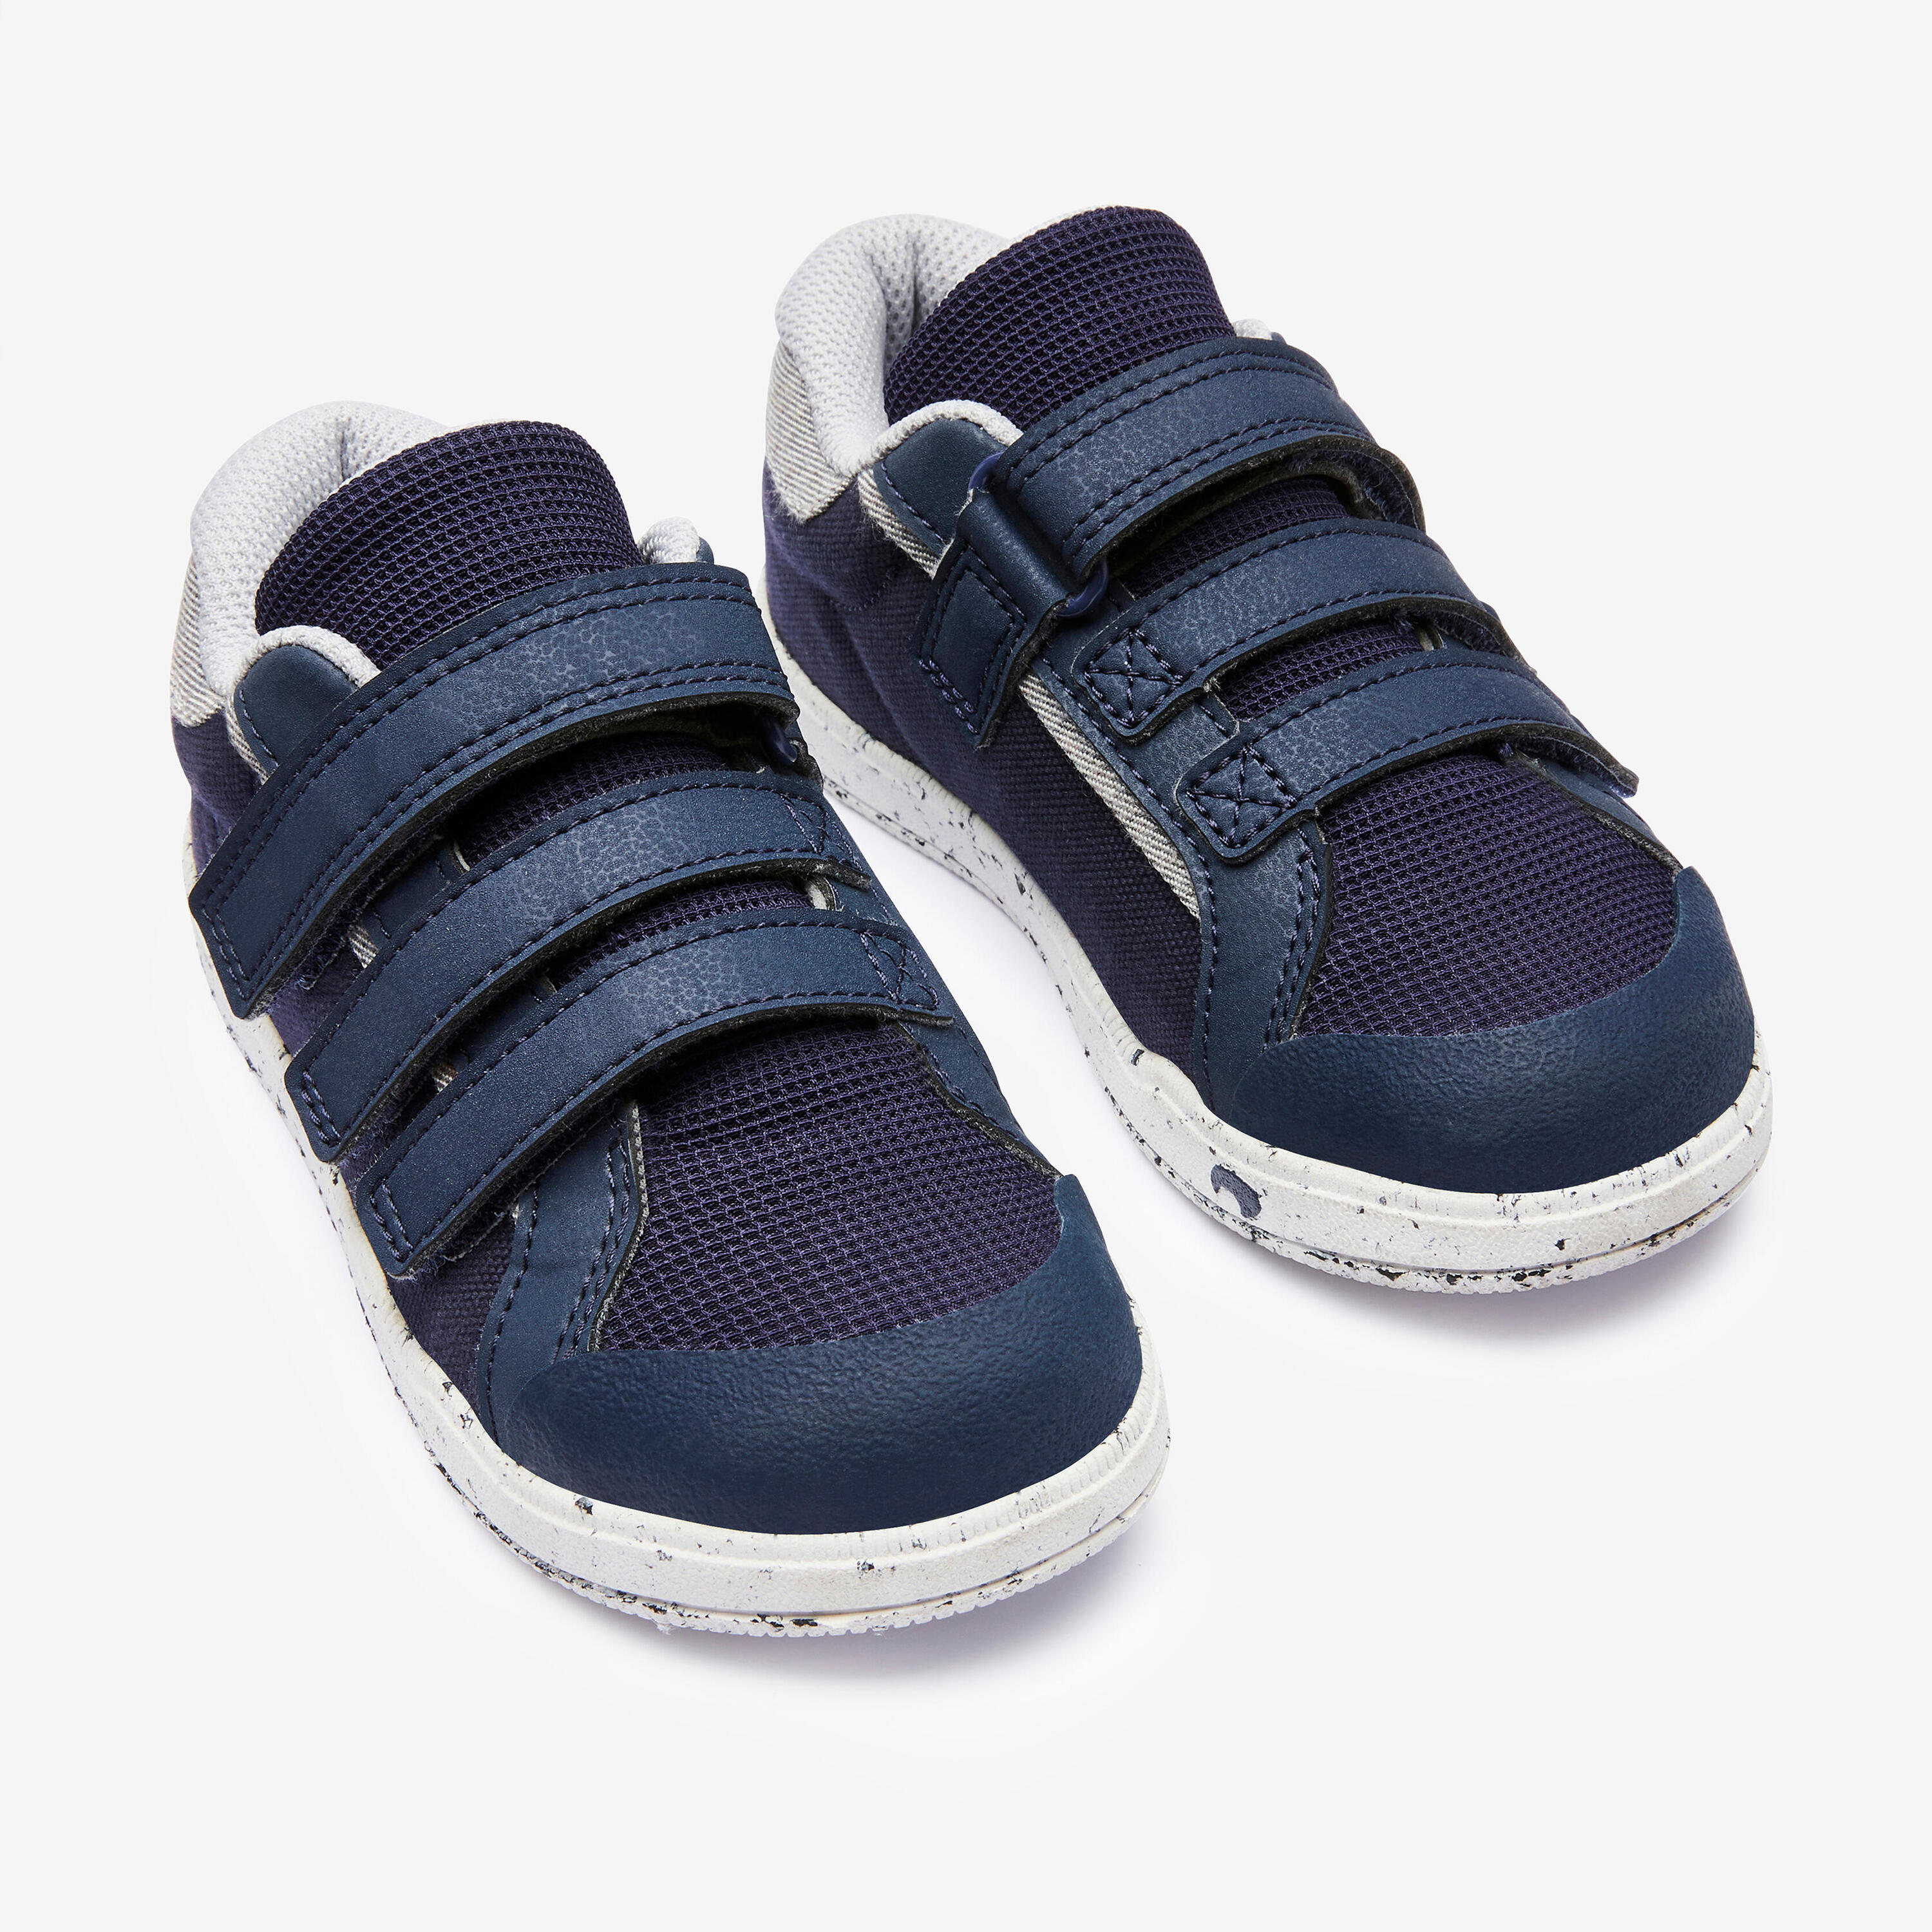 Kids' Breathable and Comfortable Shoes I Move 500 Sizes 7.5C to 9.5C 7/11